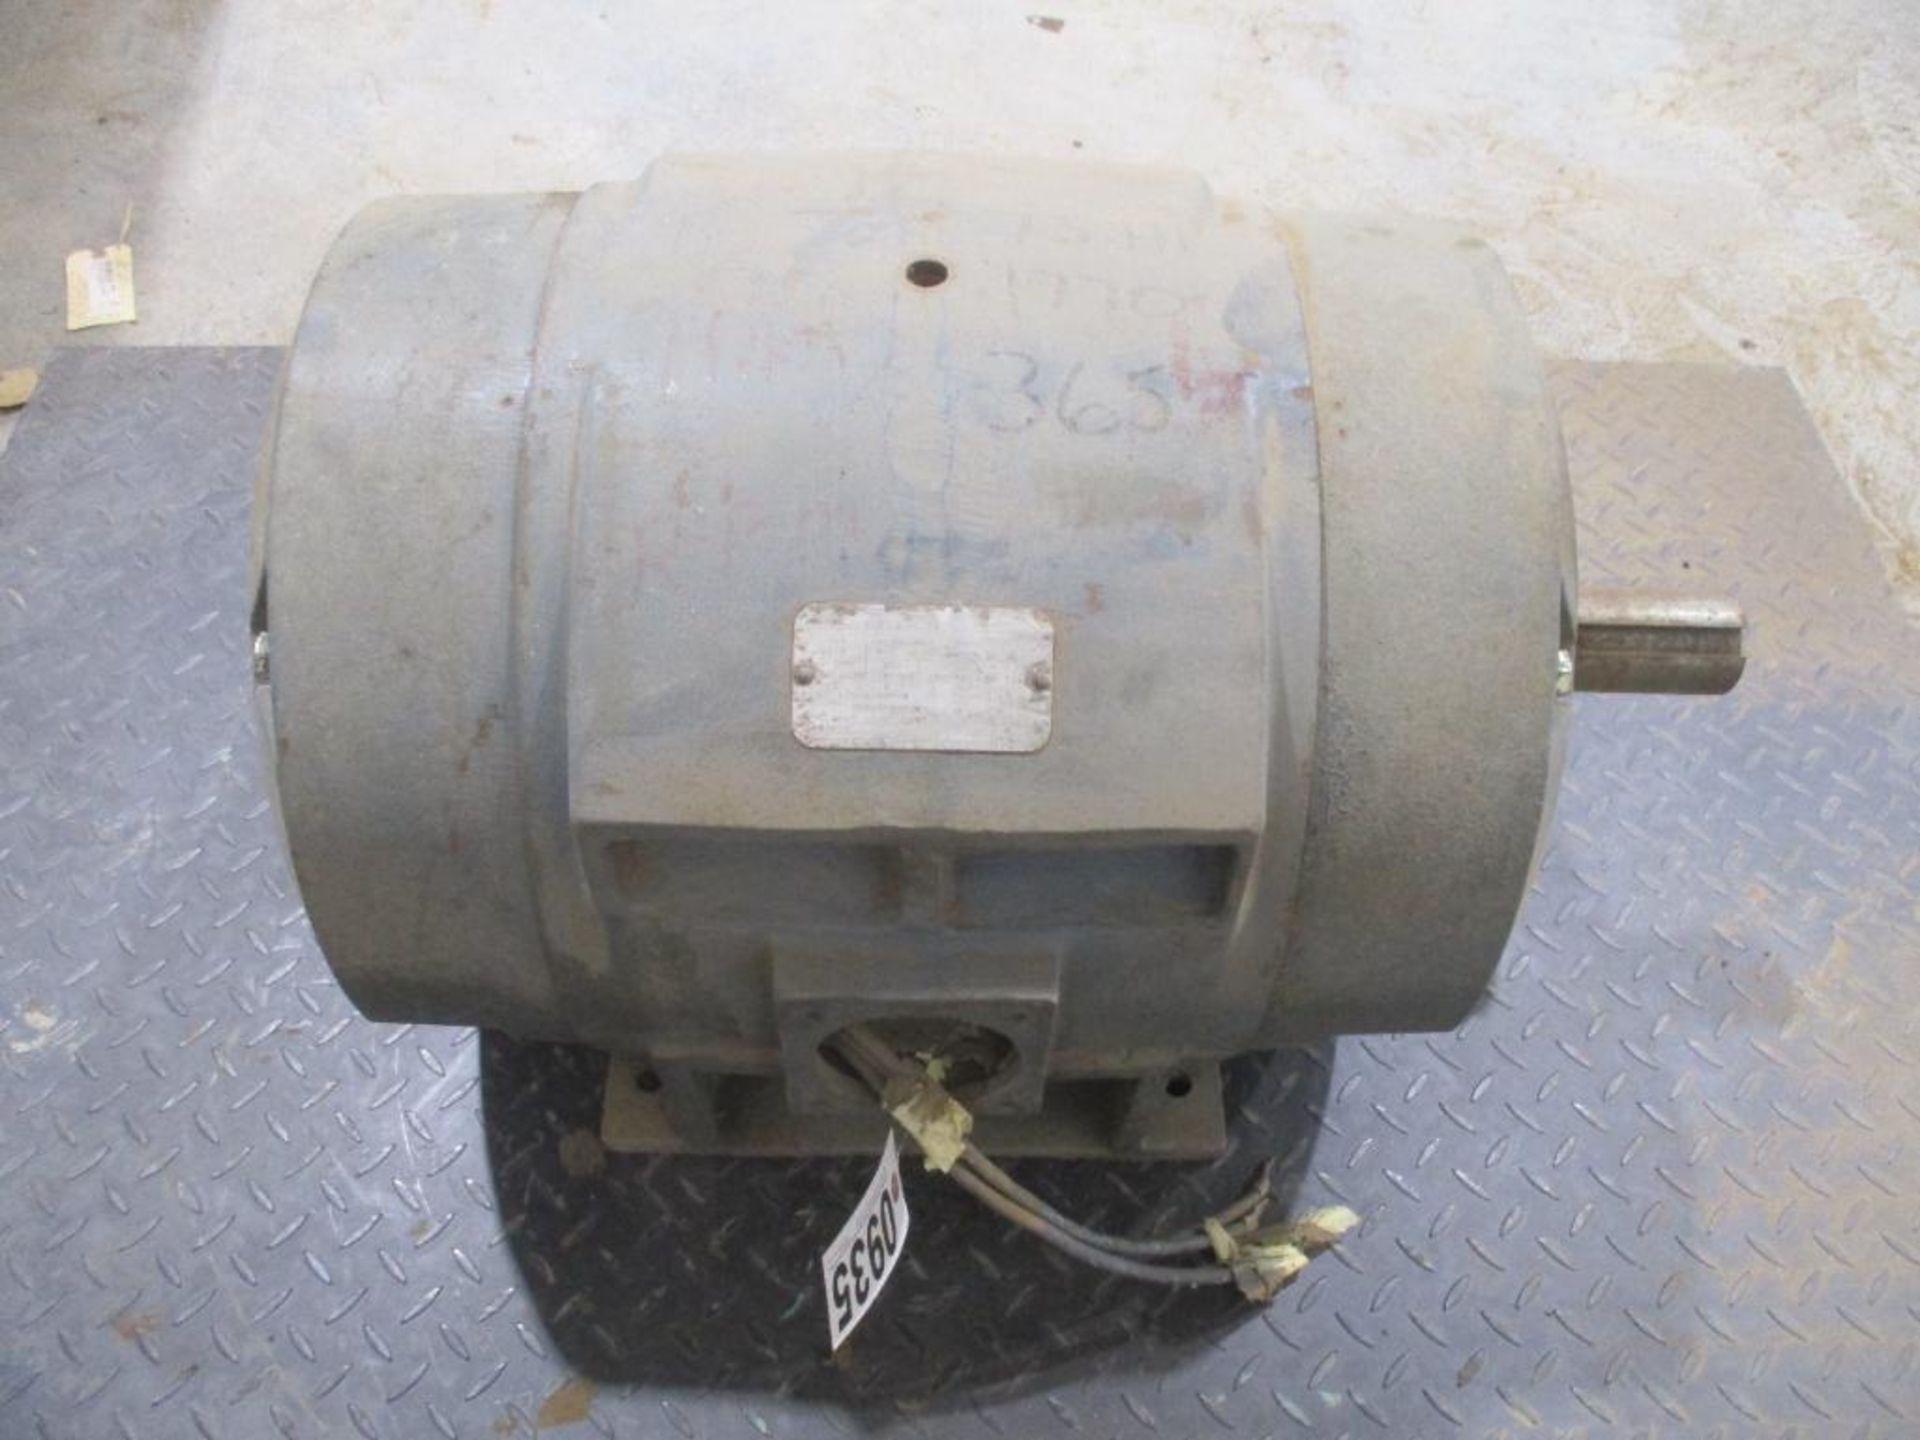 RELIANCE ELECTRIC 3 PHASE 75HP 1770RPM 365T FRAME A/C MOTOR P/N P36G22A-G2-0C, 582# lbs (There will